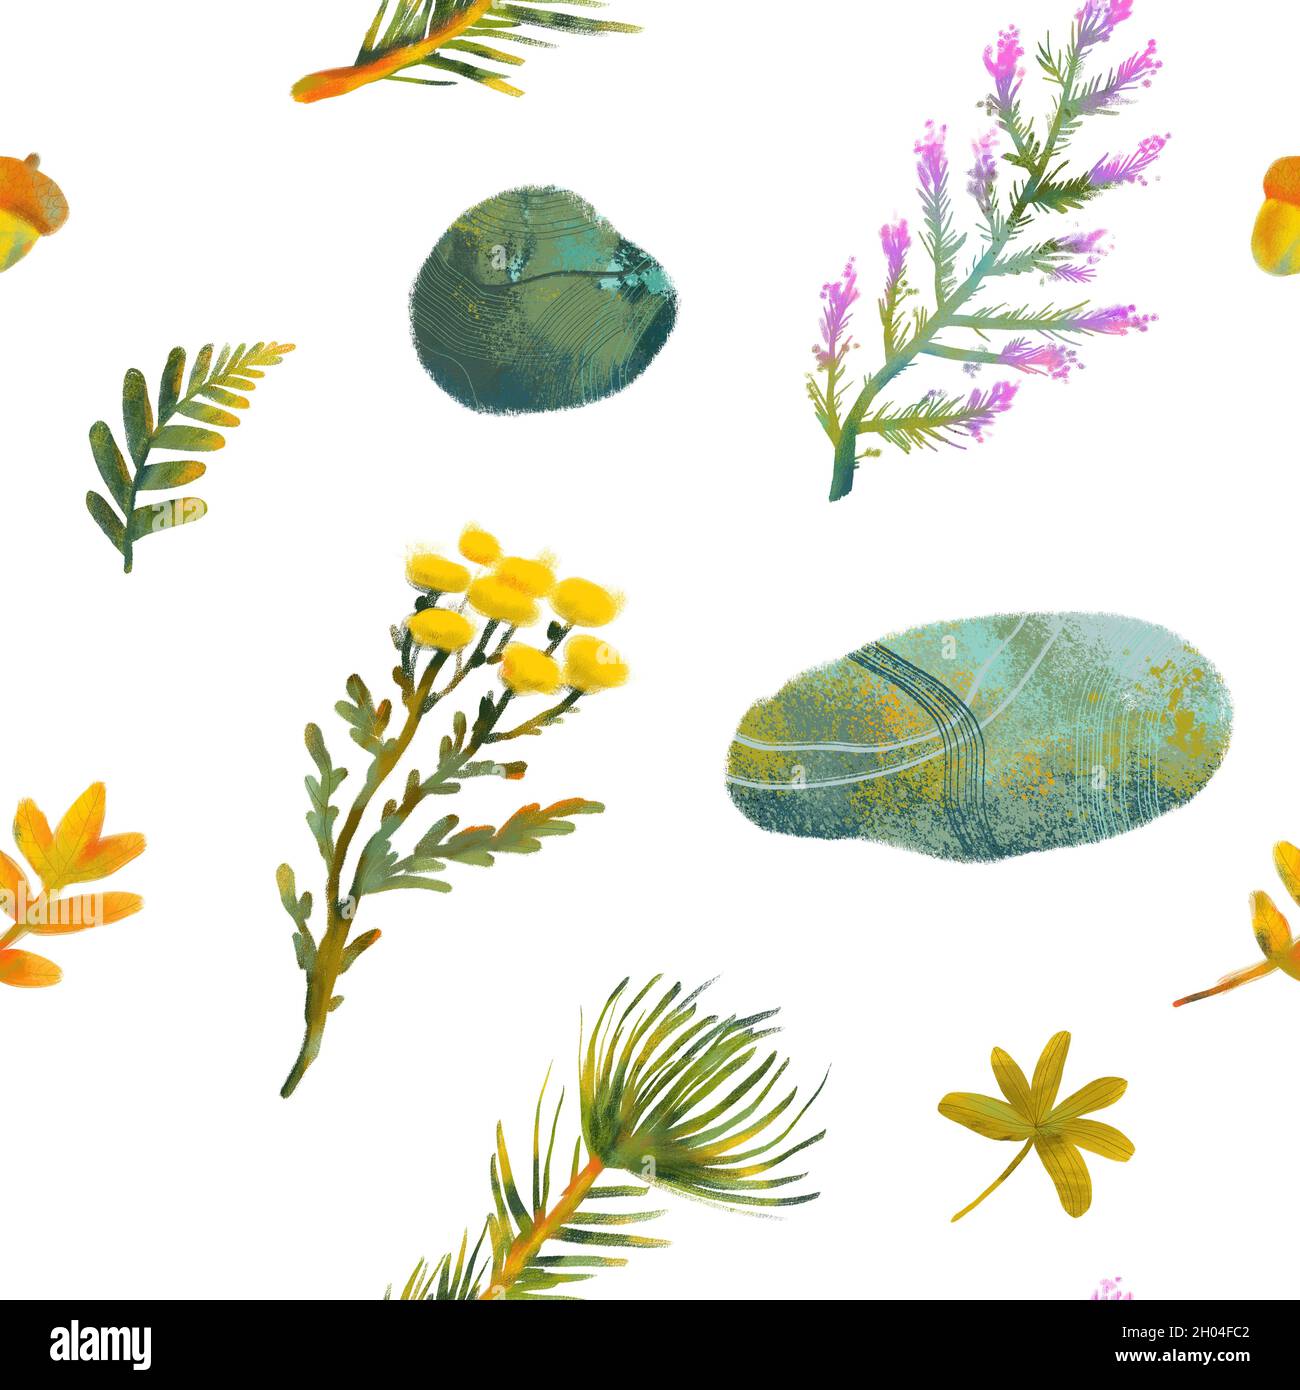 Seamless pattern with elements drawn by hand with plants. Stock Photo